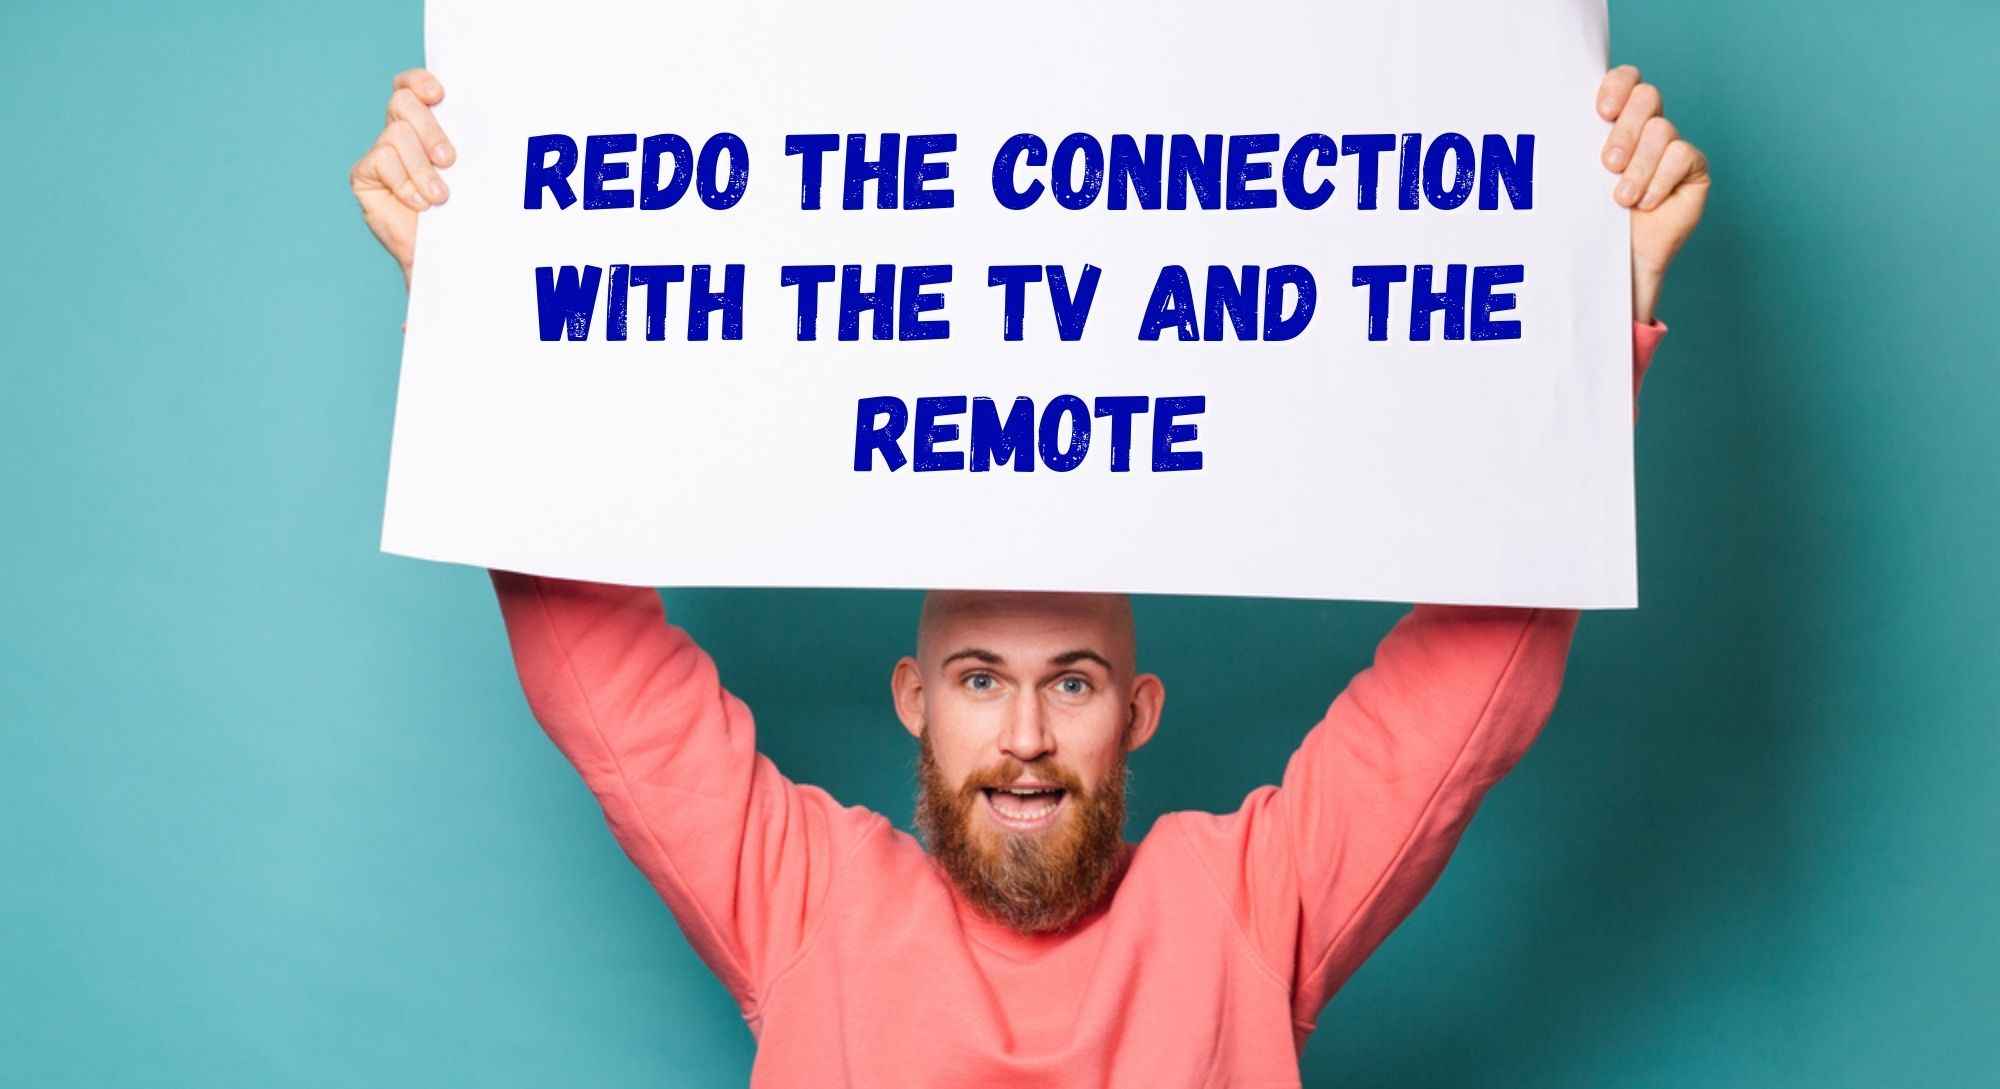 Redo The Connection With The TV And The Remote